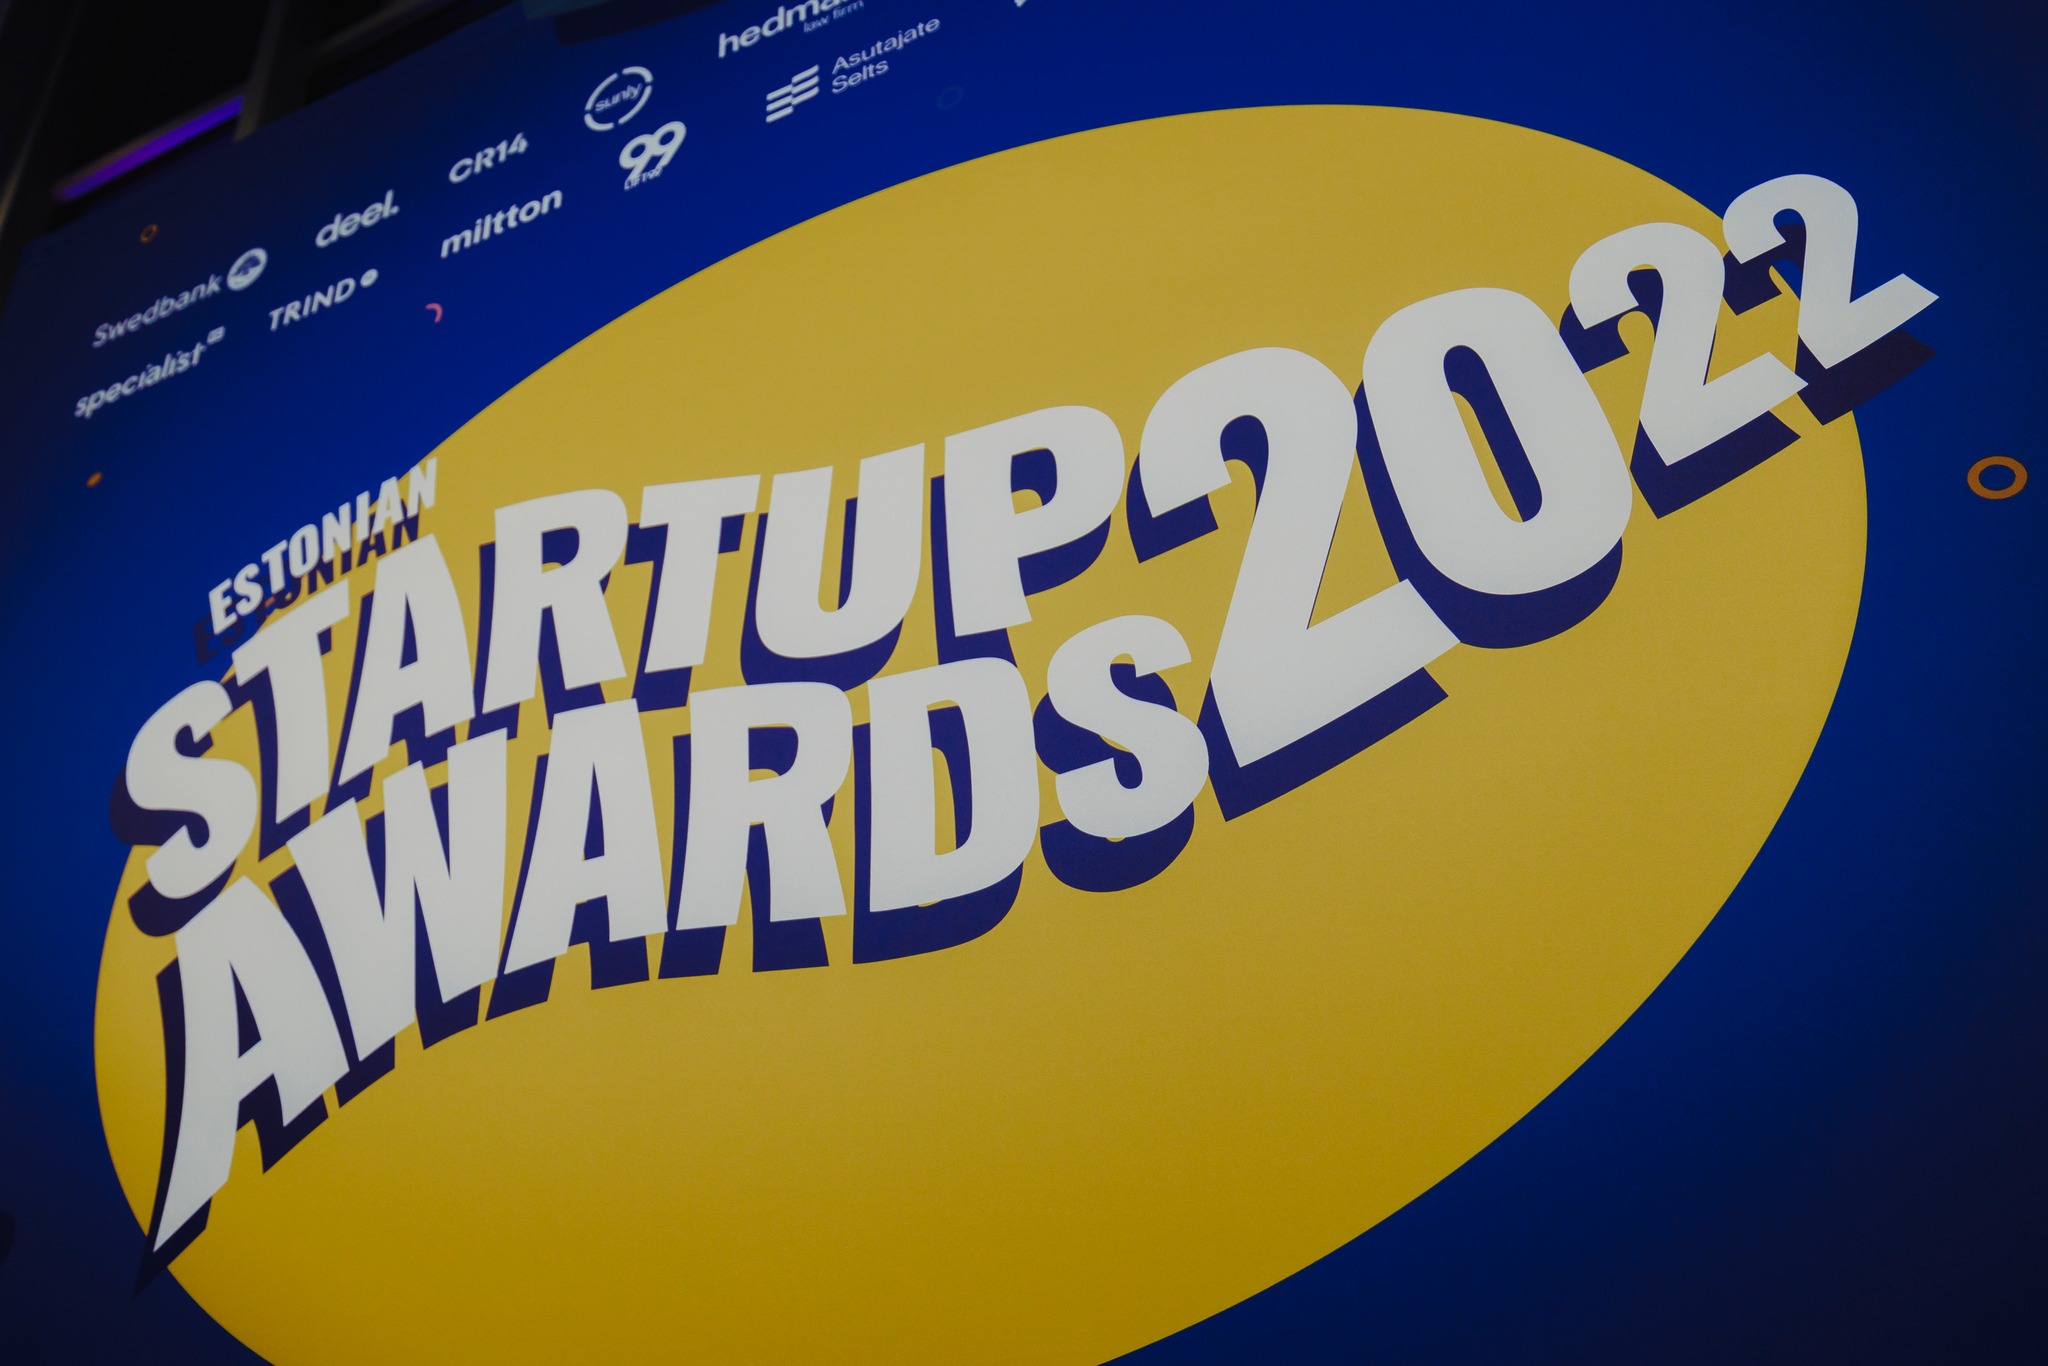 Who Was the Founder of the Year? – Recap of the Estonian Startup Awards 2022